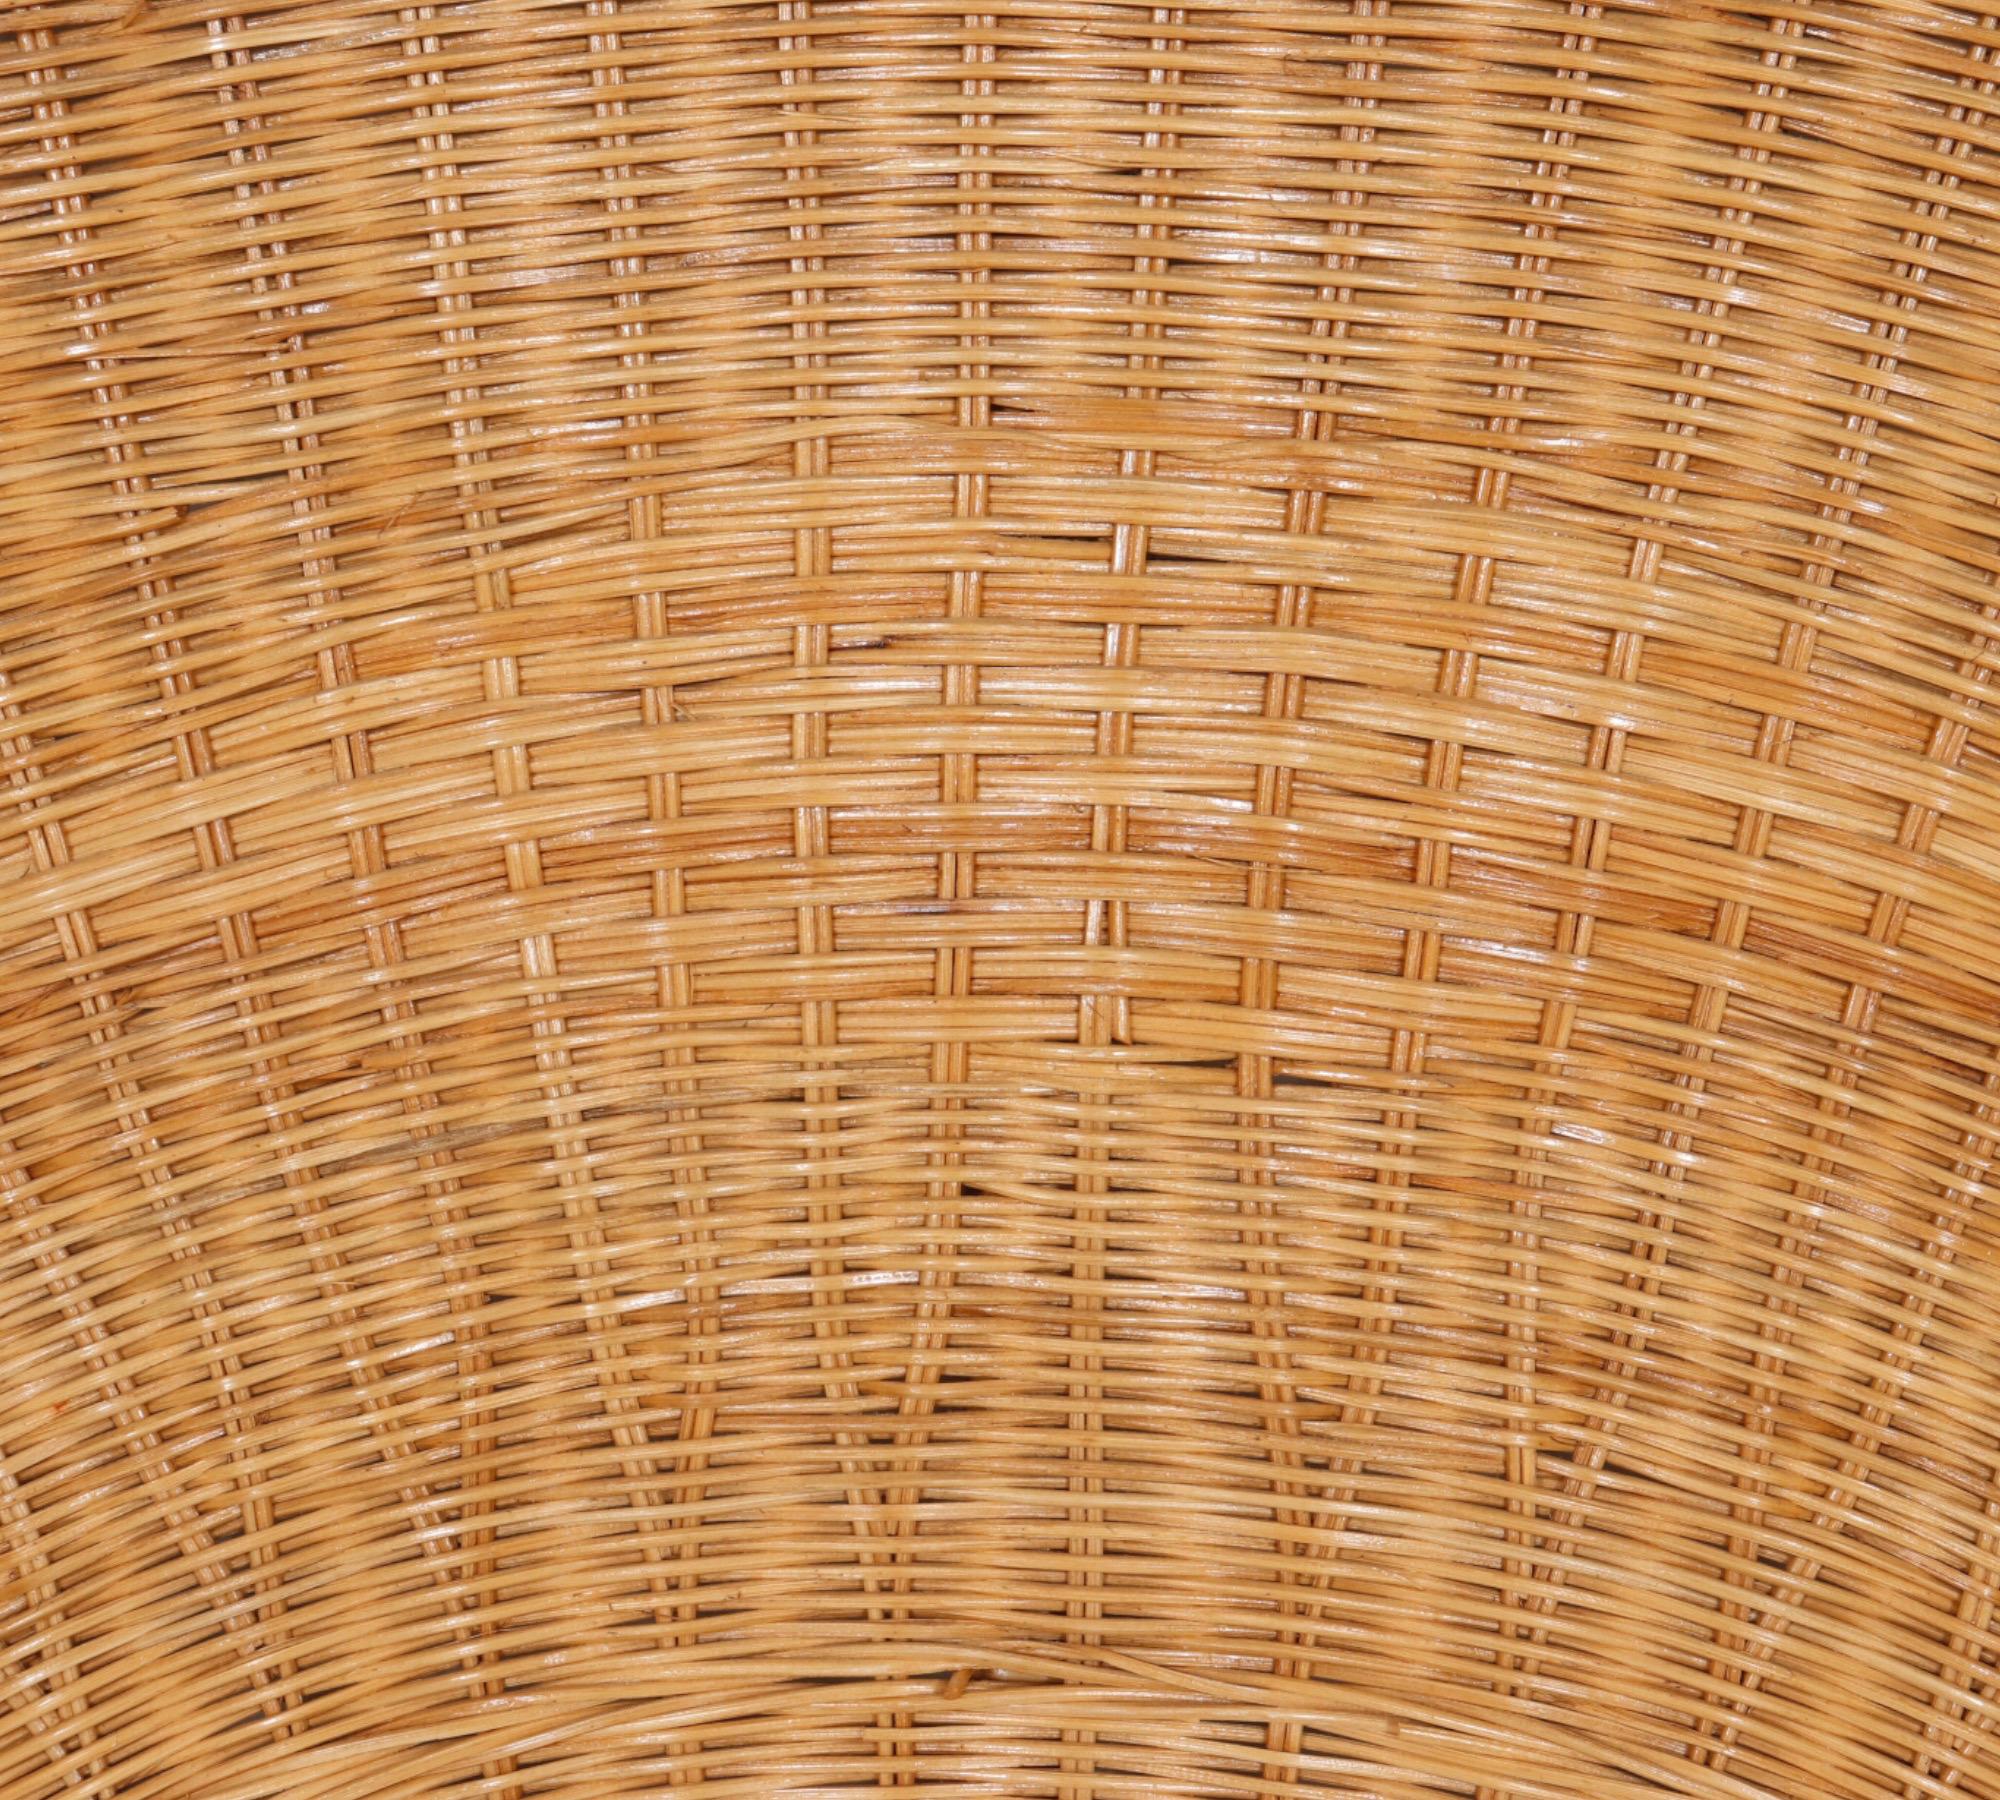 A half-moon full size headboard made of wicker woven rattan. Decorated in the middle with a woven diamond and trimmed with braided rattan.
